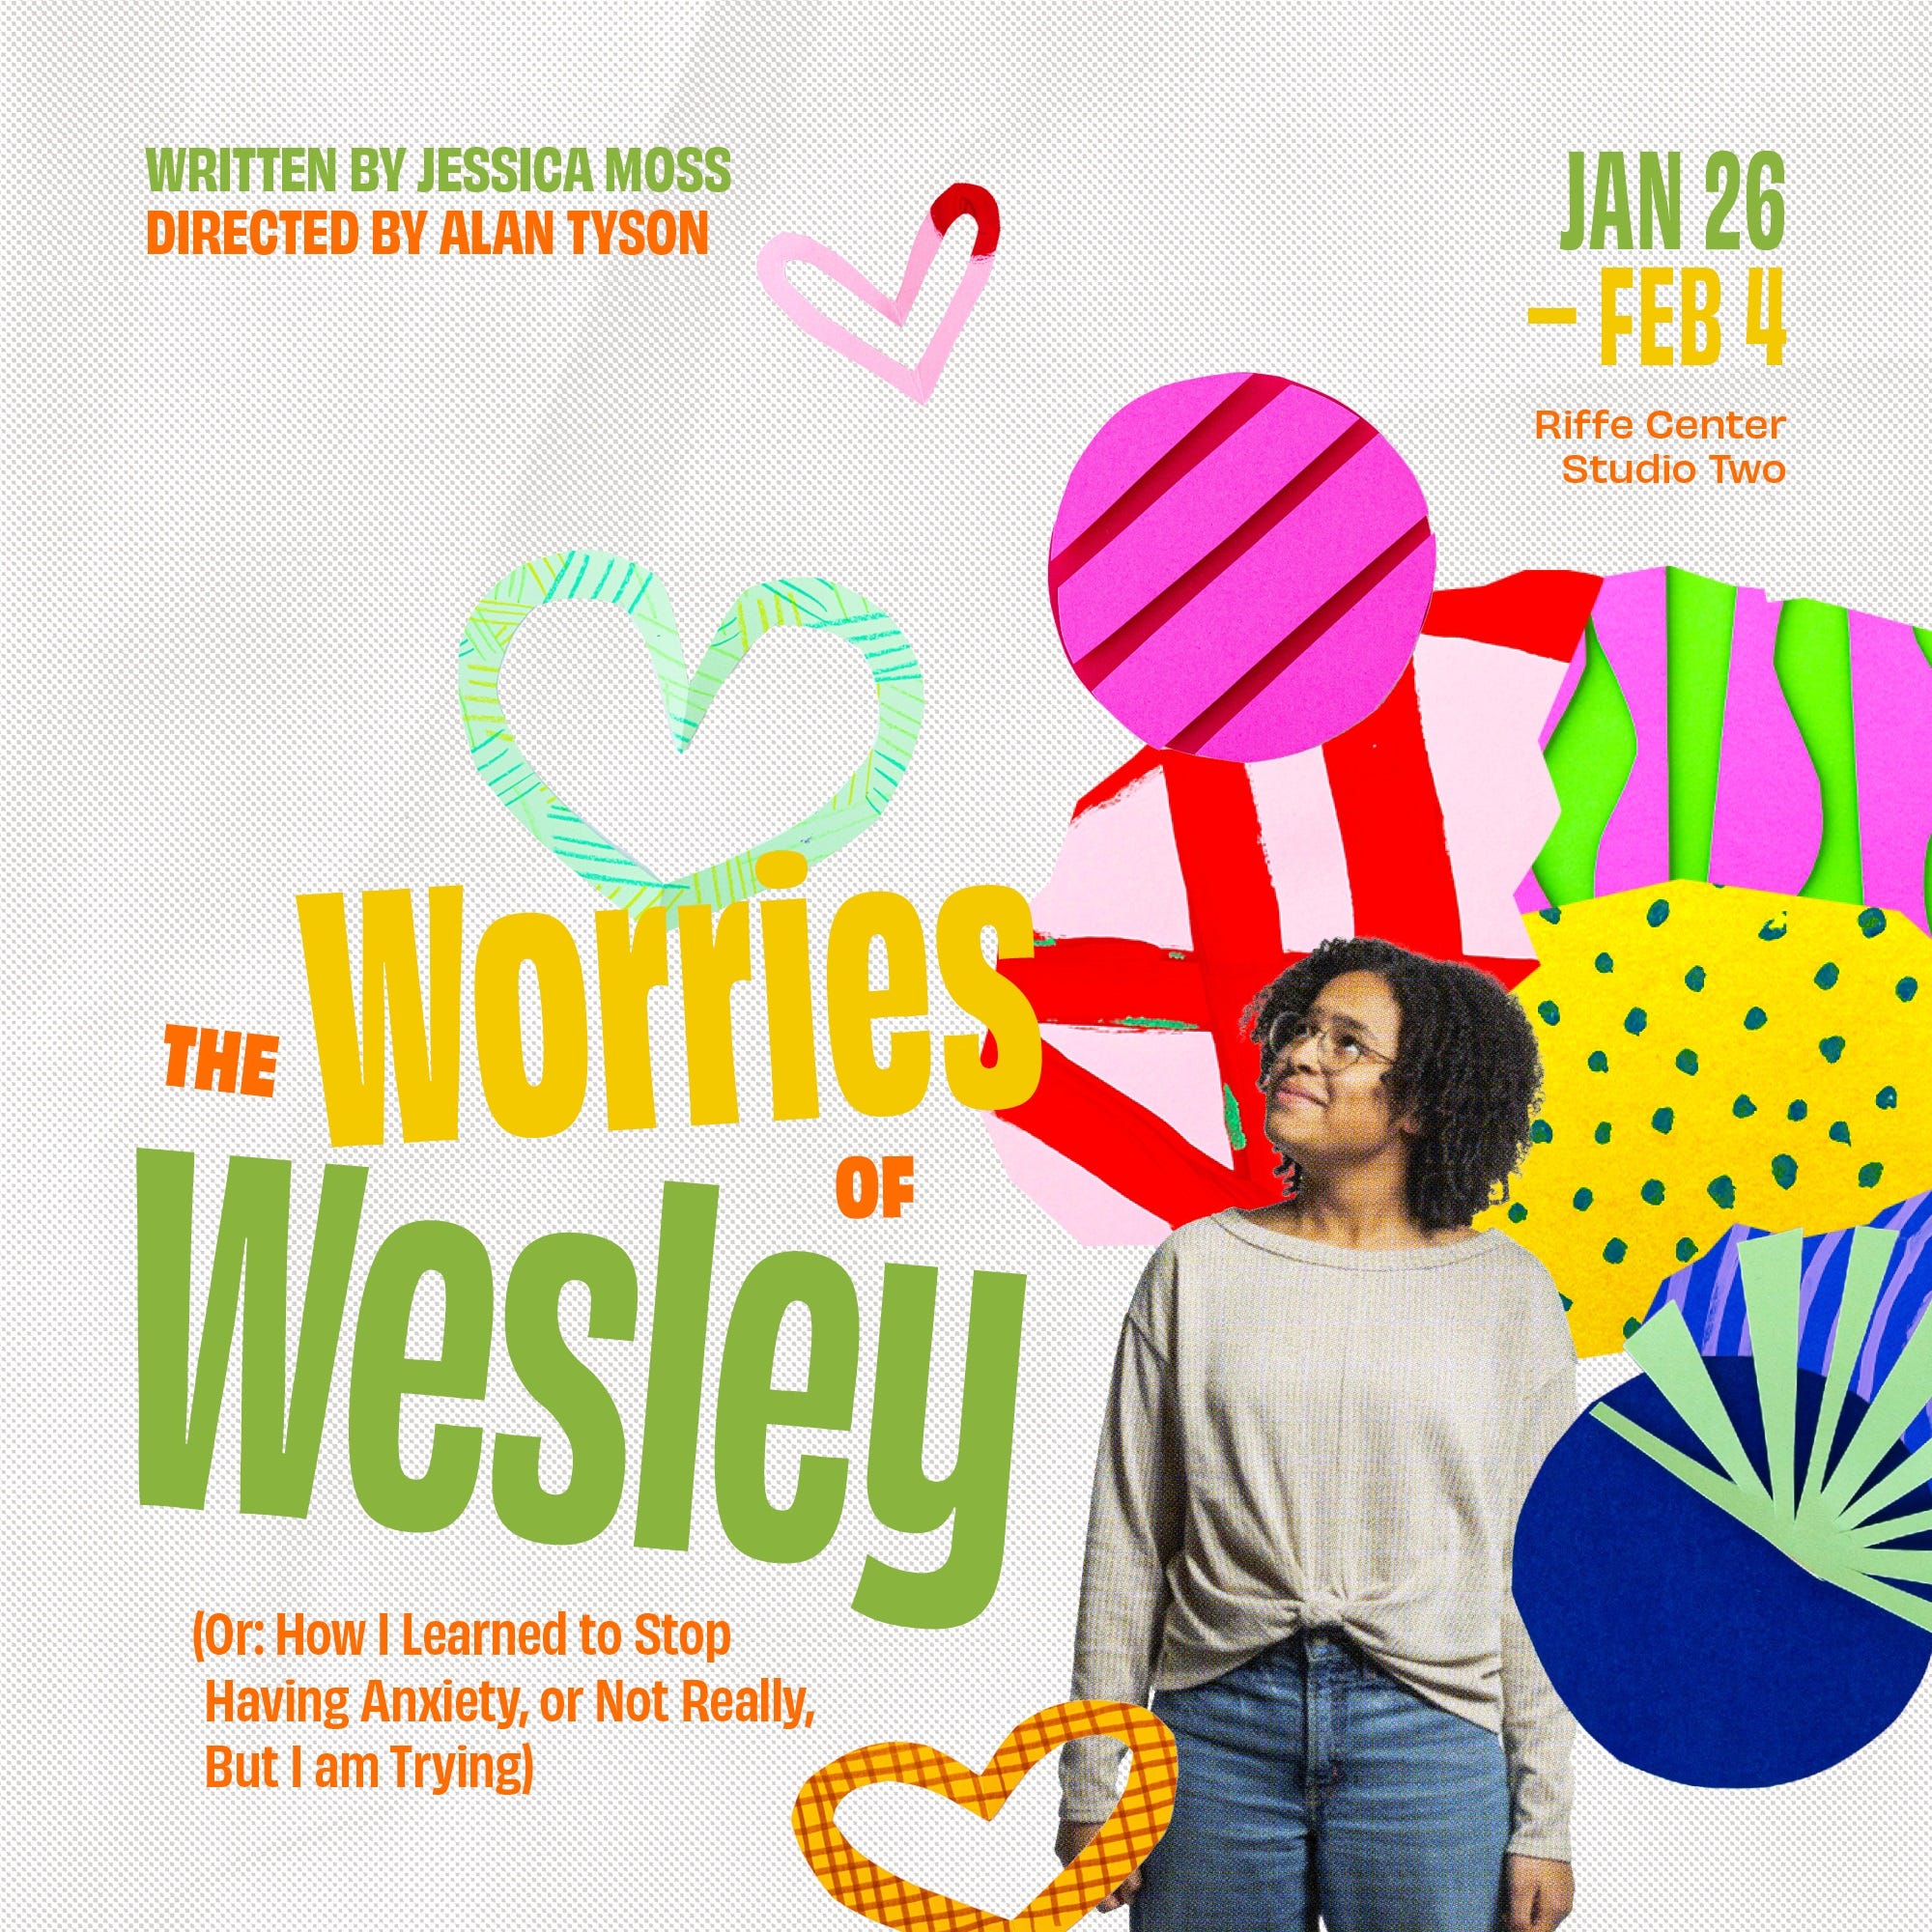 The Contemporary Theatre of Ohio presents “The Worries of Wesley (Or: How I Learned to Stop Having Anxiety, or Not Really, But I am Trying)” Jan. 26-Feb. 4 at the Riffe Center.